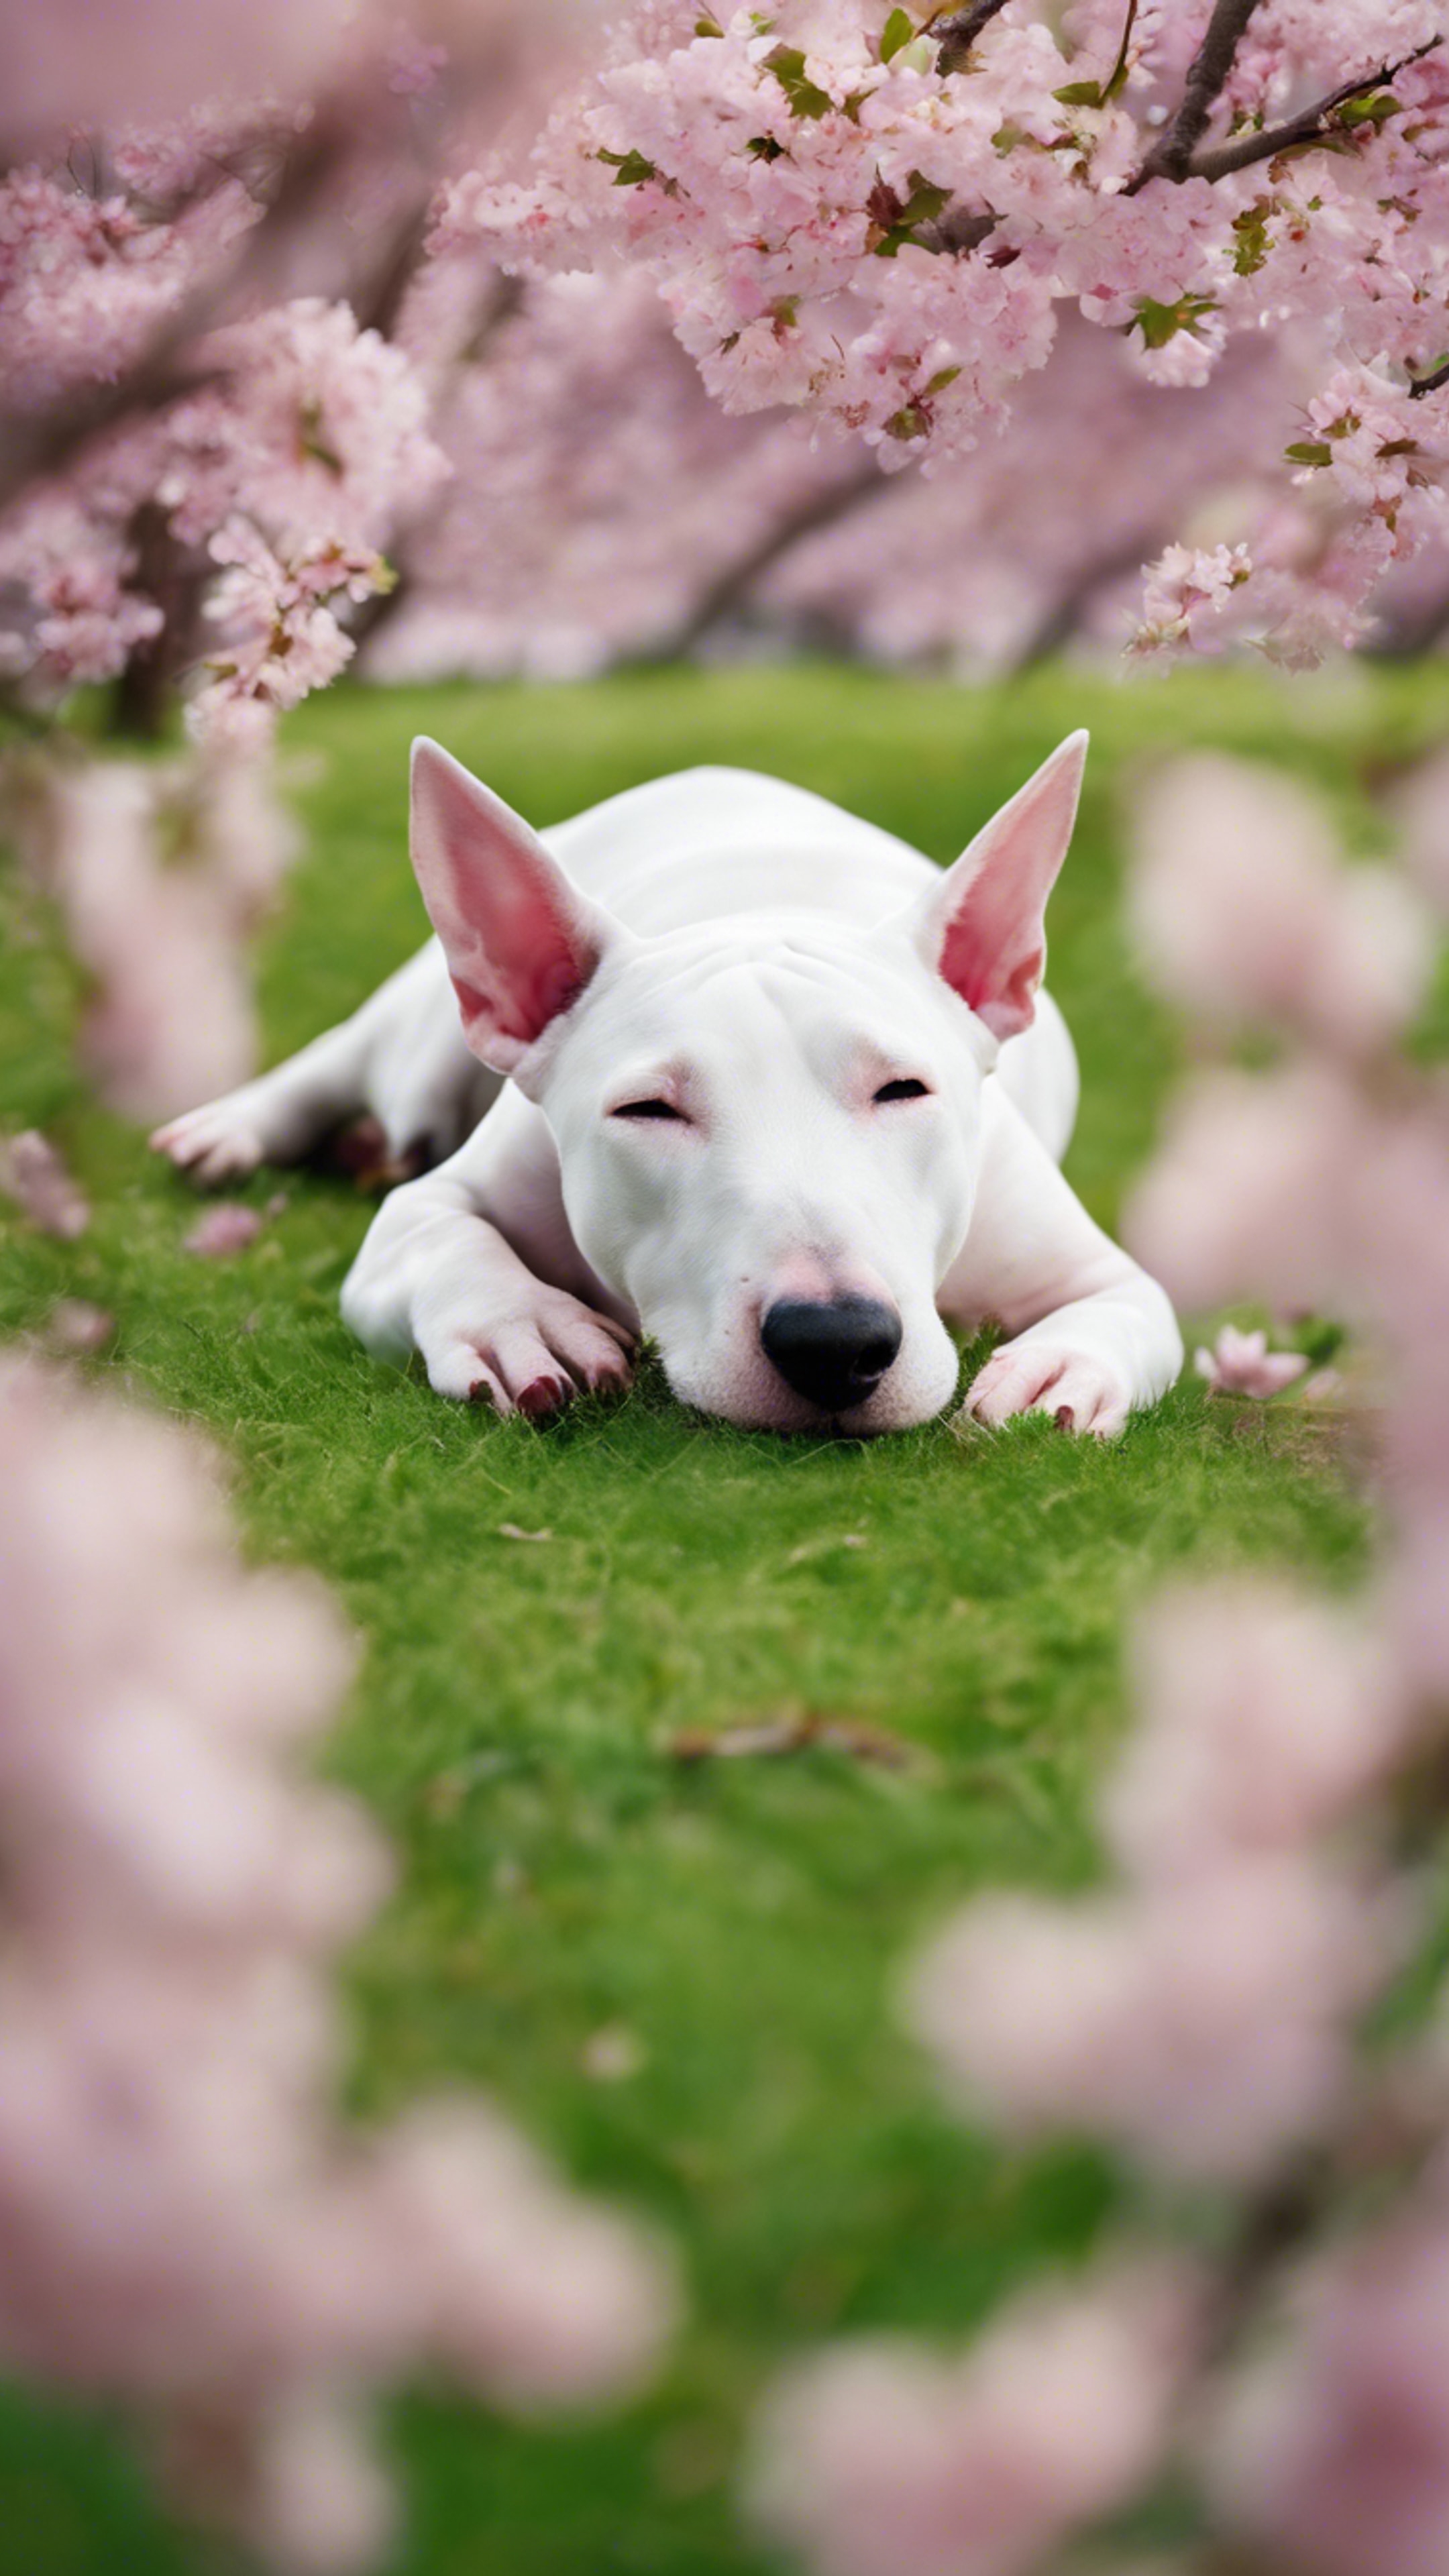 A Bull Terrier curled into a ball, sleeping in a bright green city park at the base of a cherry blossom tree. Wallpaper[3df408a3b3f7480298db]